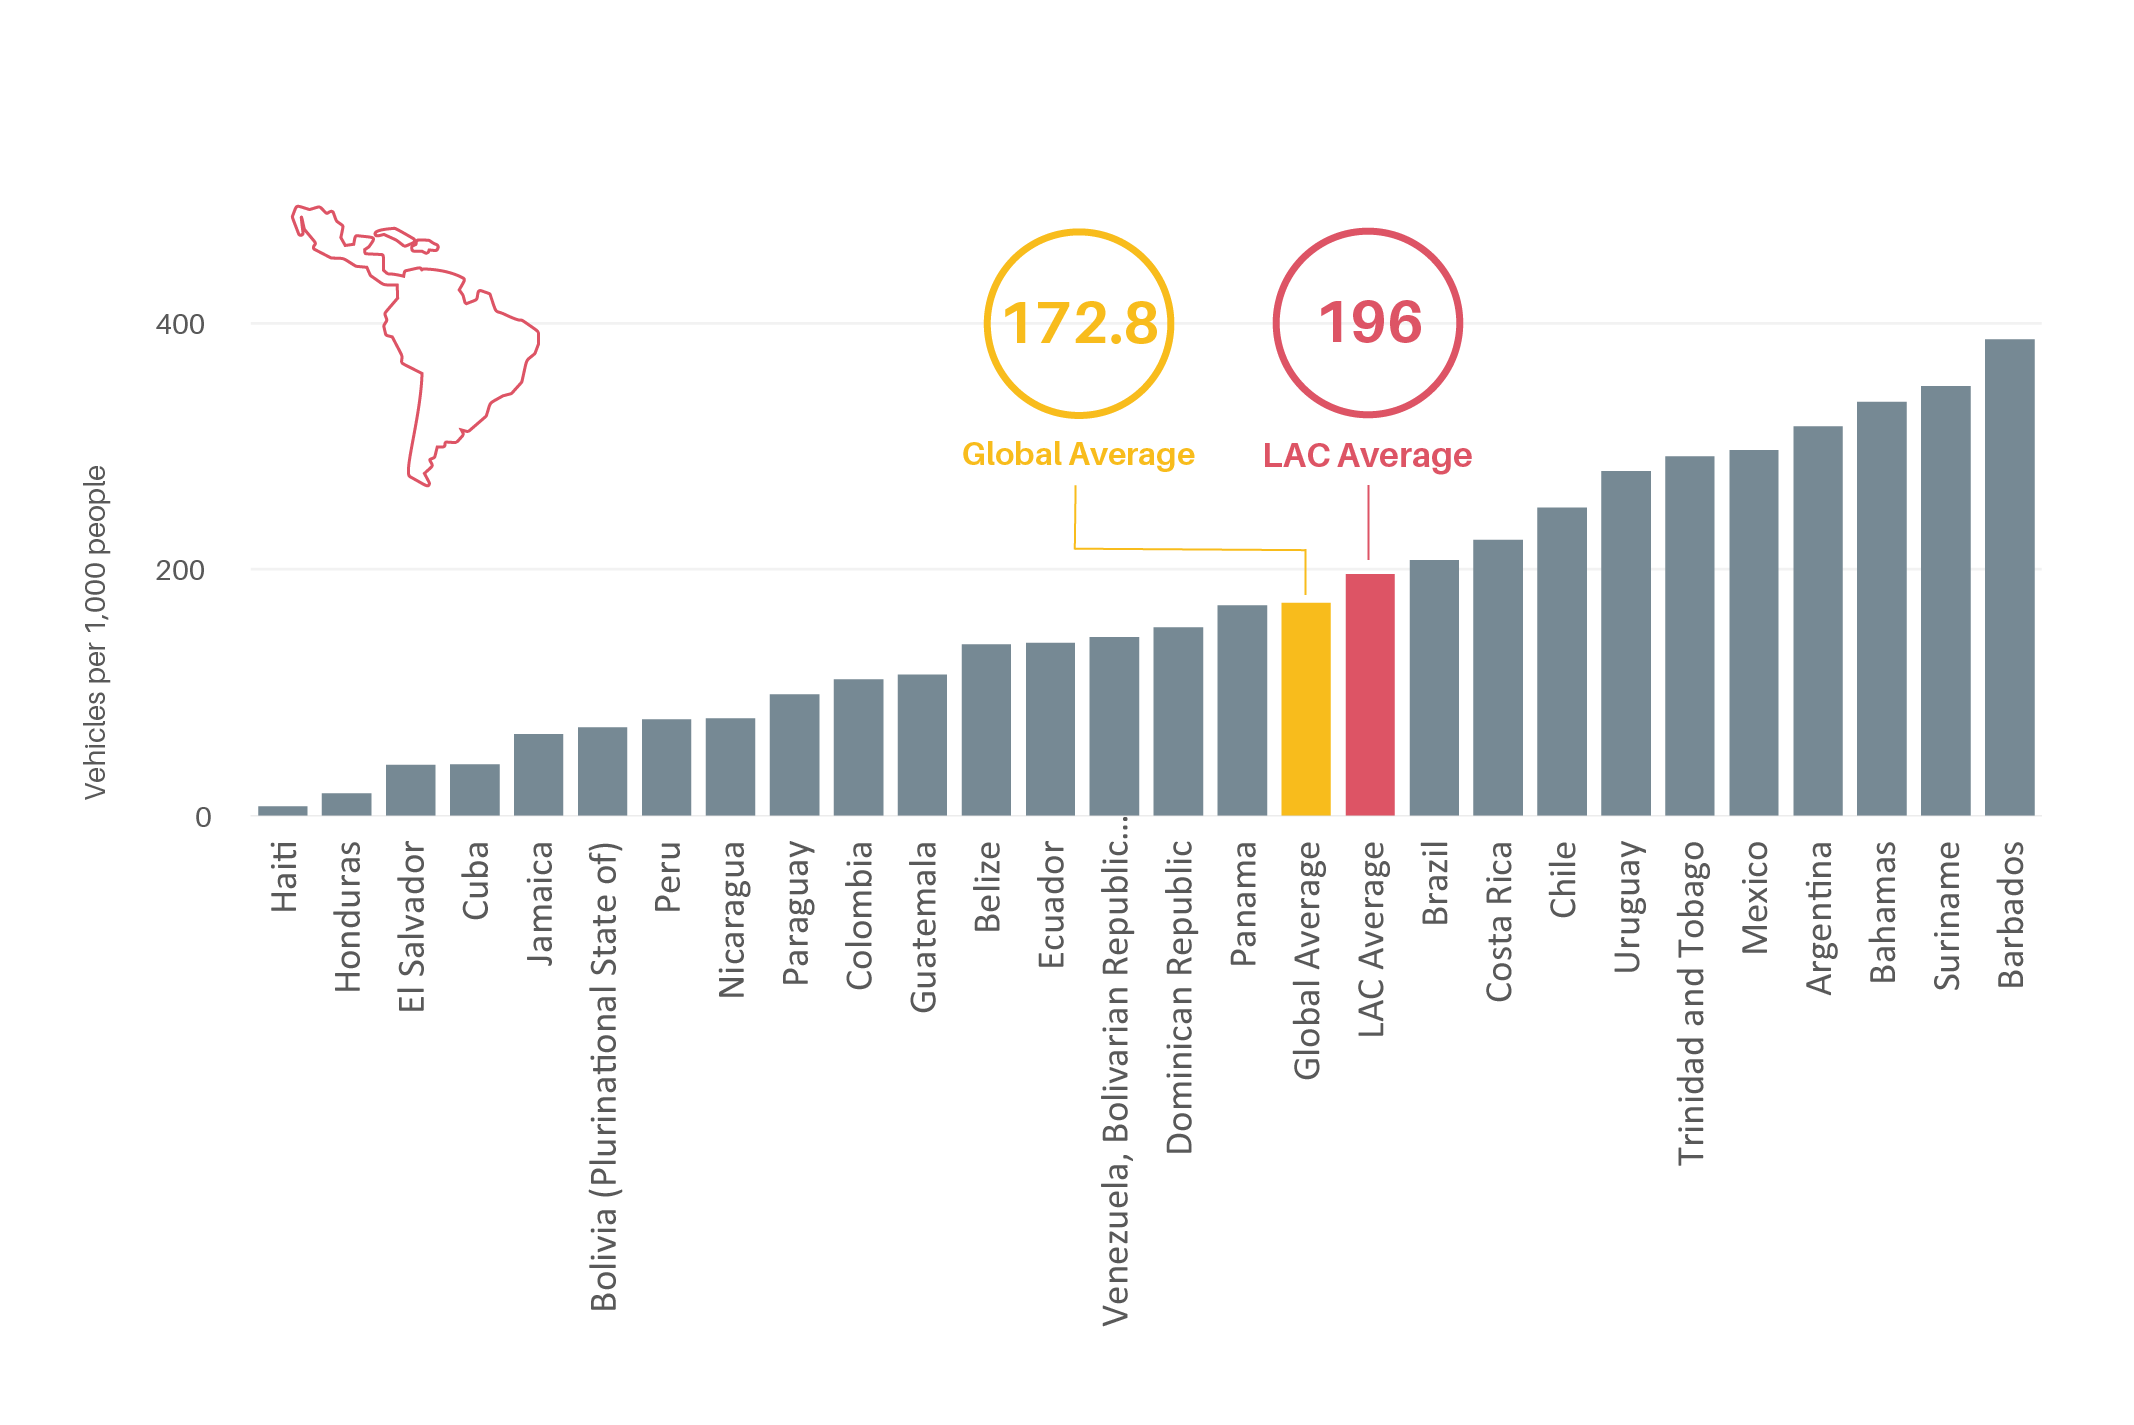 Car ownership rates per 1,000 people in Latin America and the Caribbean, 2015